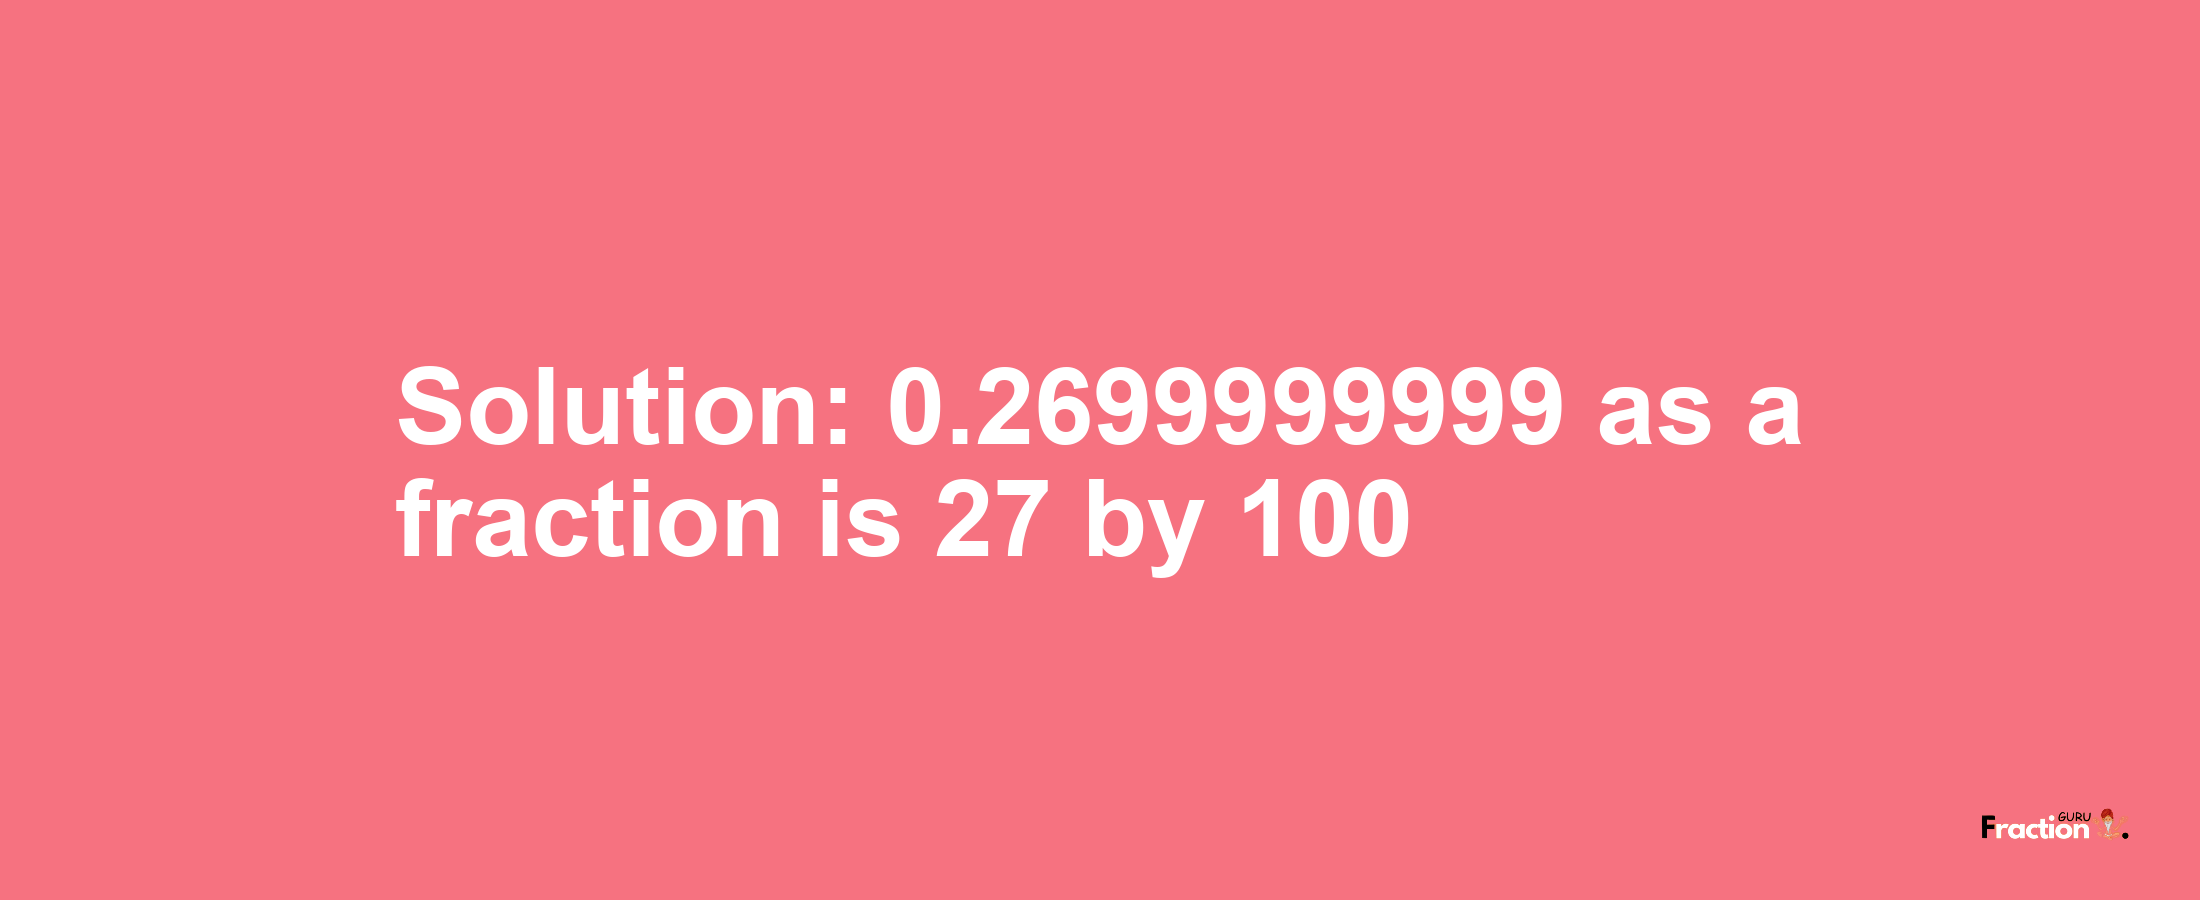 Solution:0.2699999999 as a fraction is 27/100